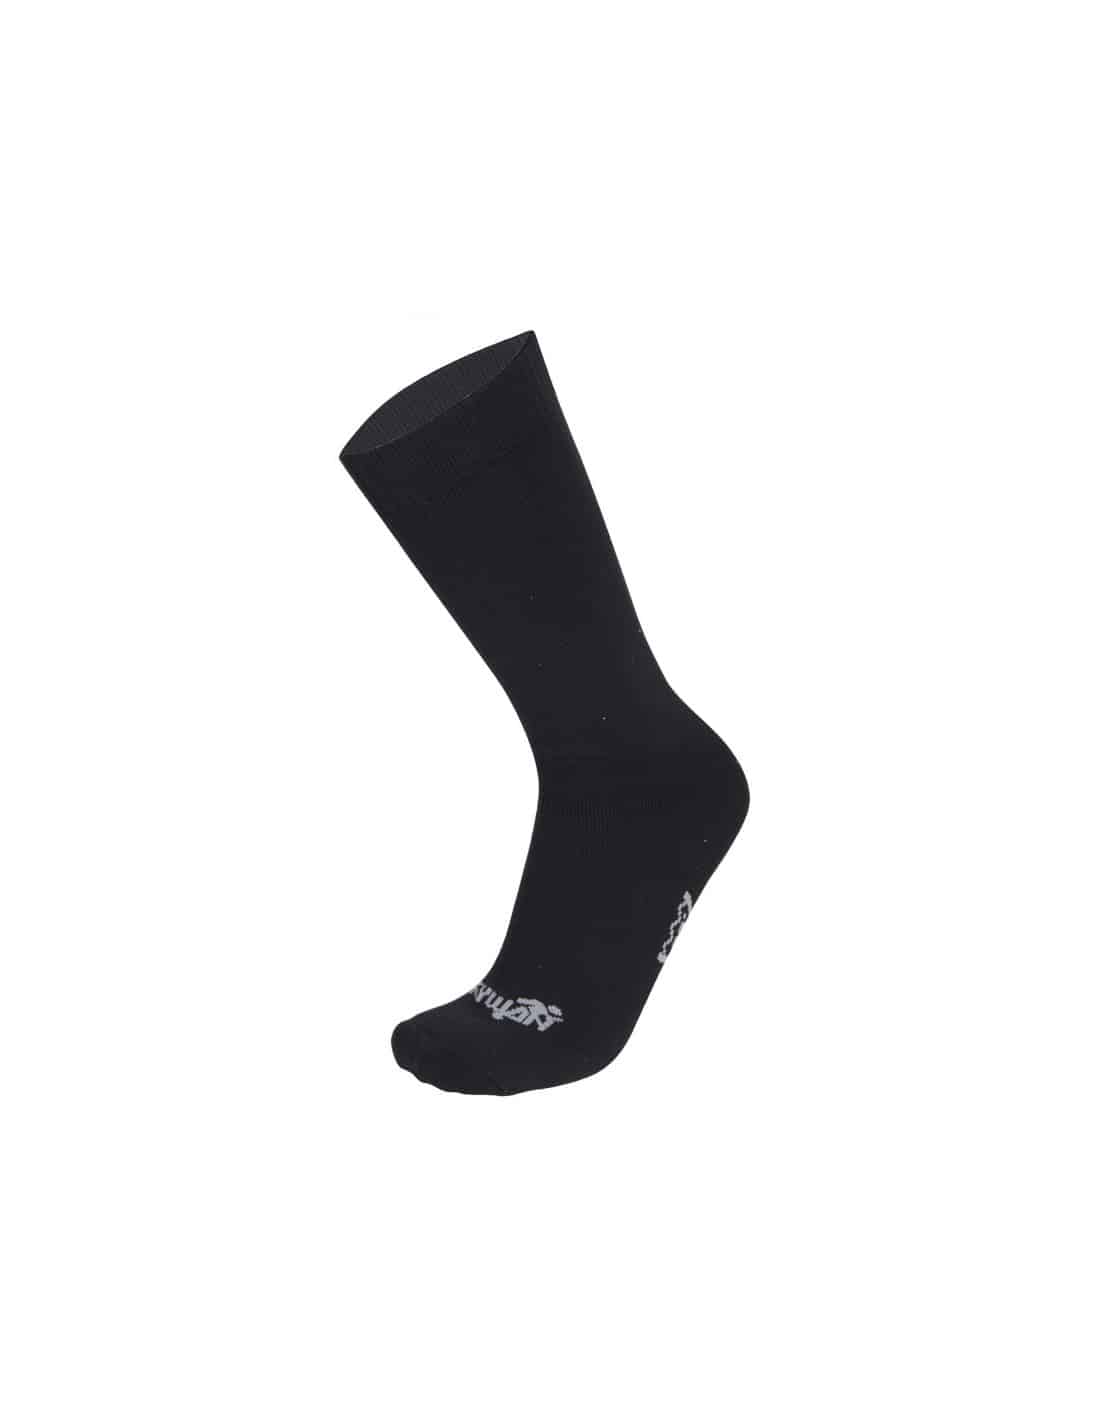 Chaussettes polaire femme Blanches 